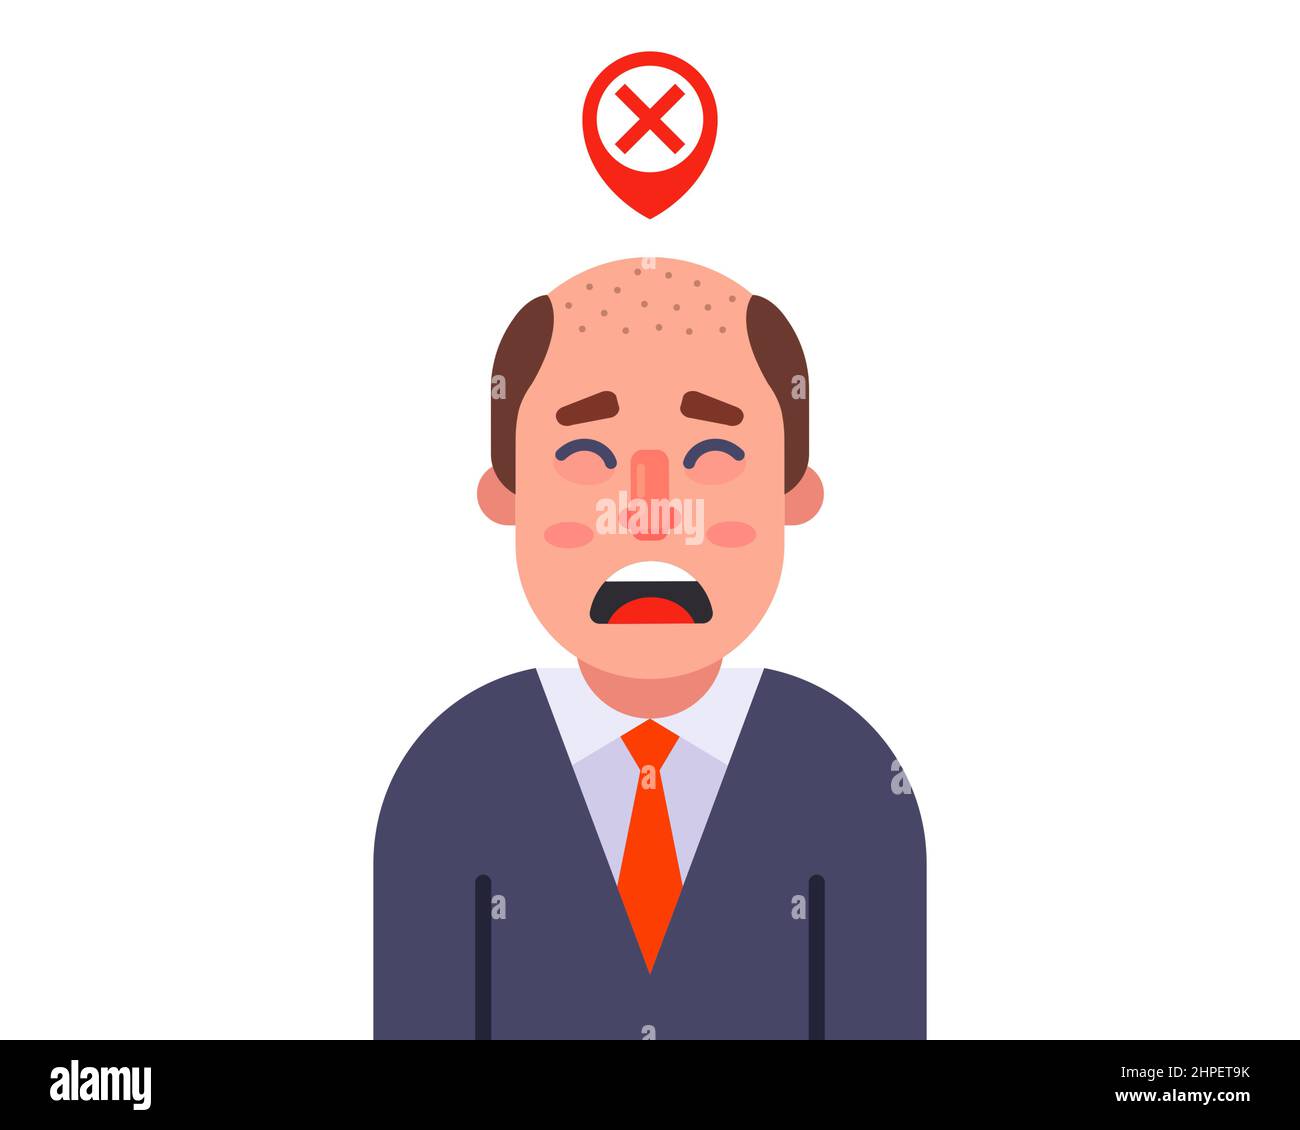 upset man with bald head. worry about hair loss. flat vector illustration. Stock Vector